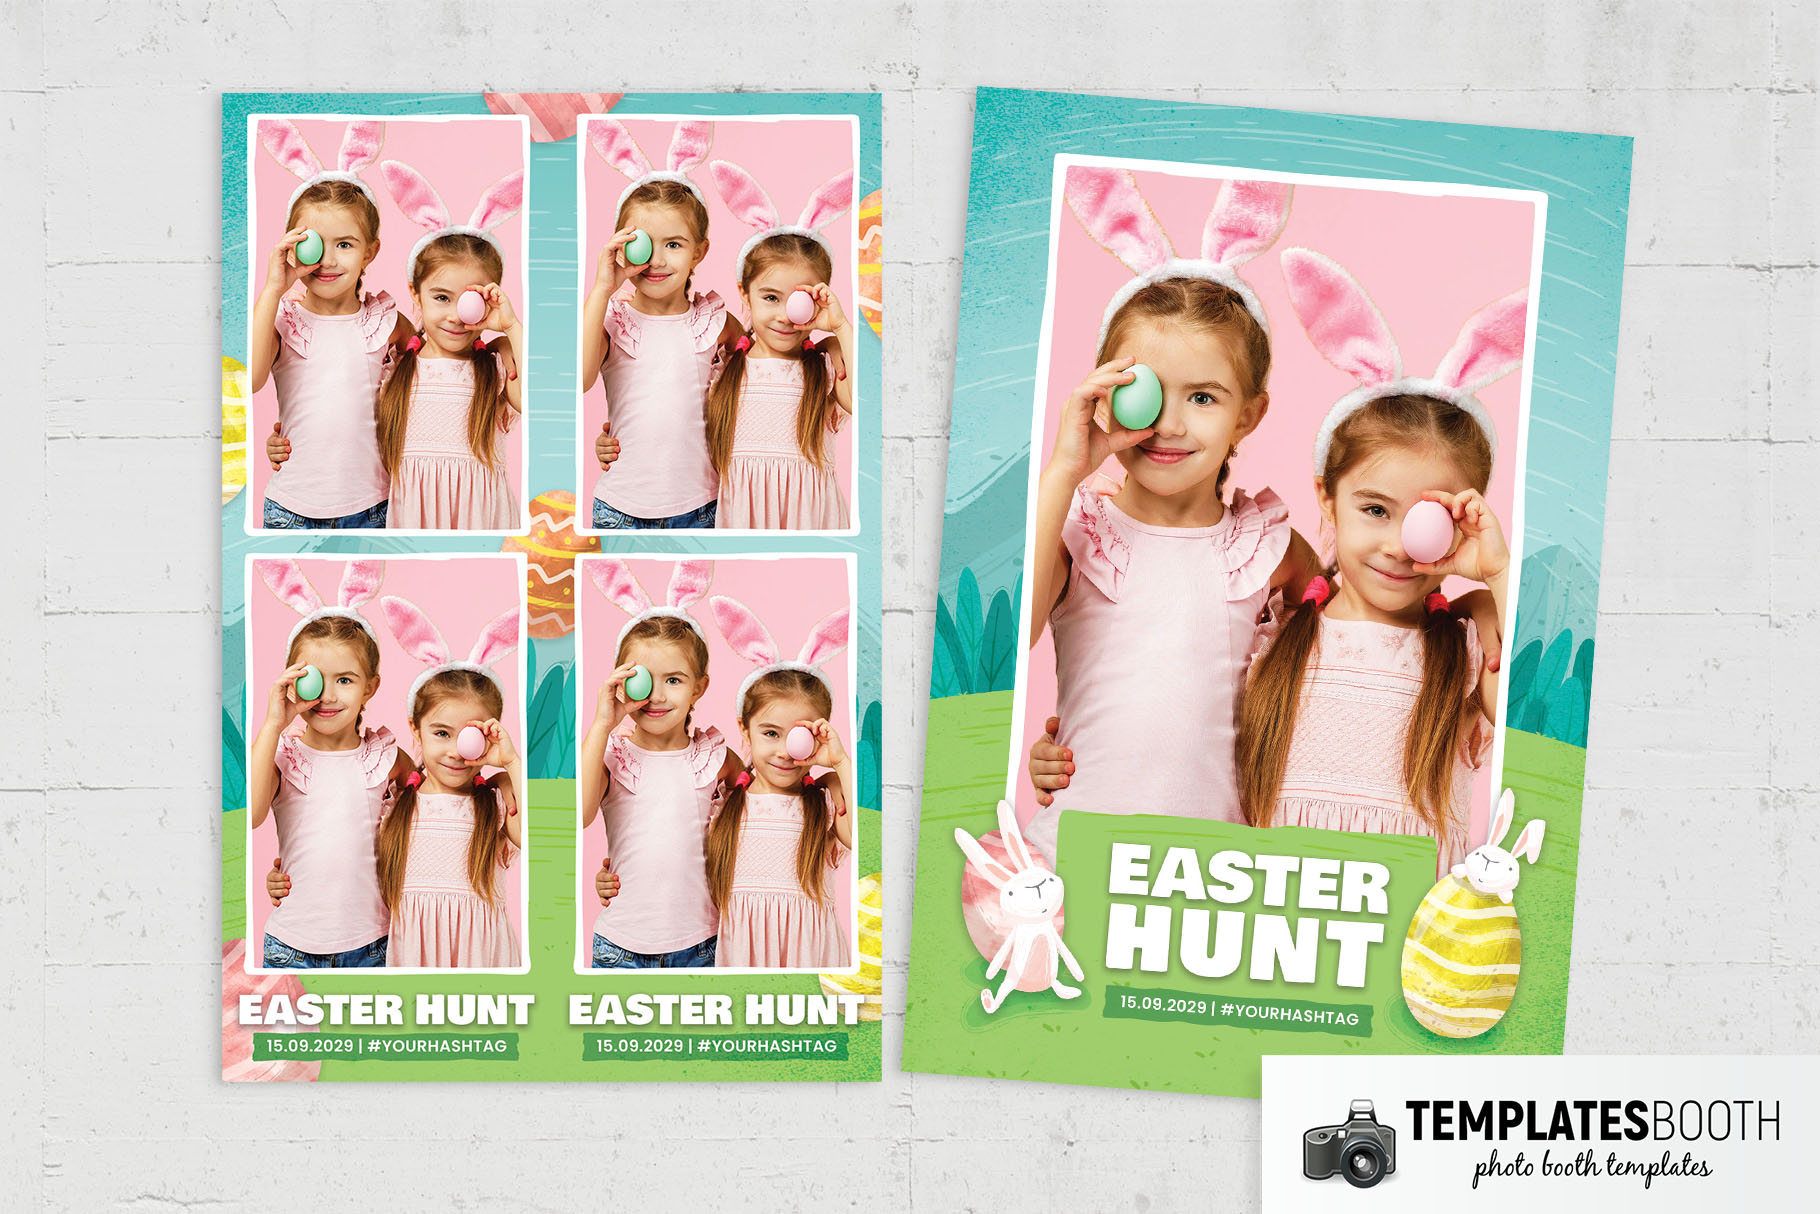 Easter Egg Hunt Photo Booth Template